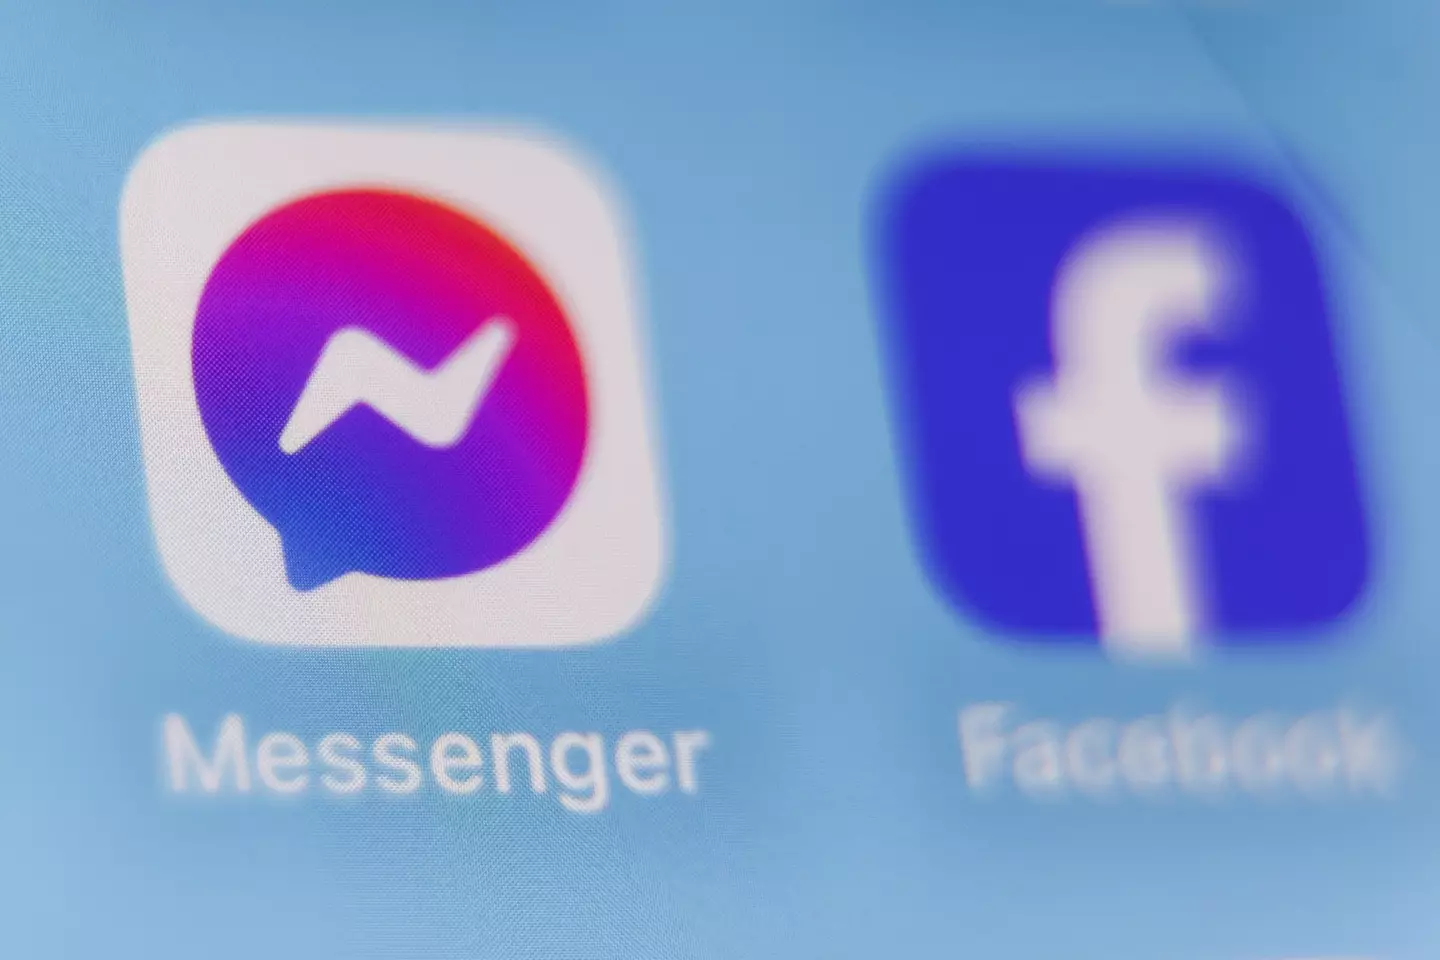 It's a common feature for many messaging apps.(Jakub Porzycki/NurPhoto via Getty Images)